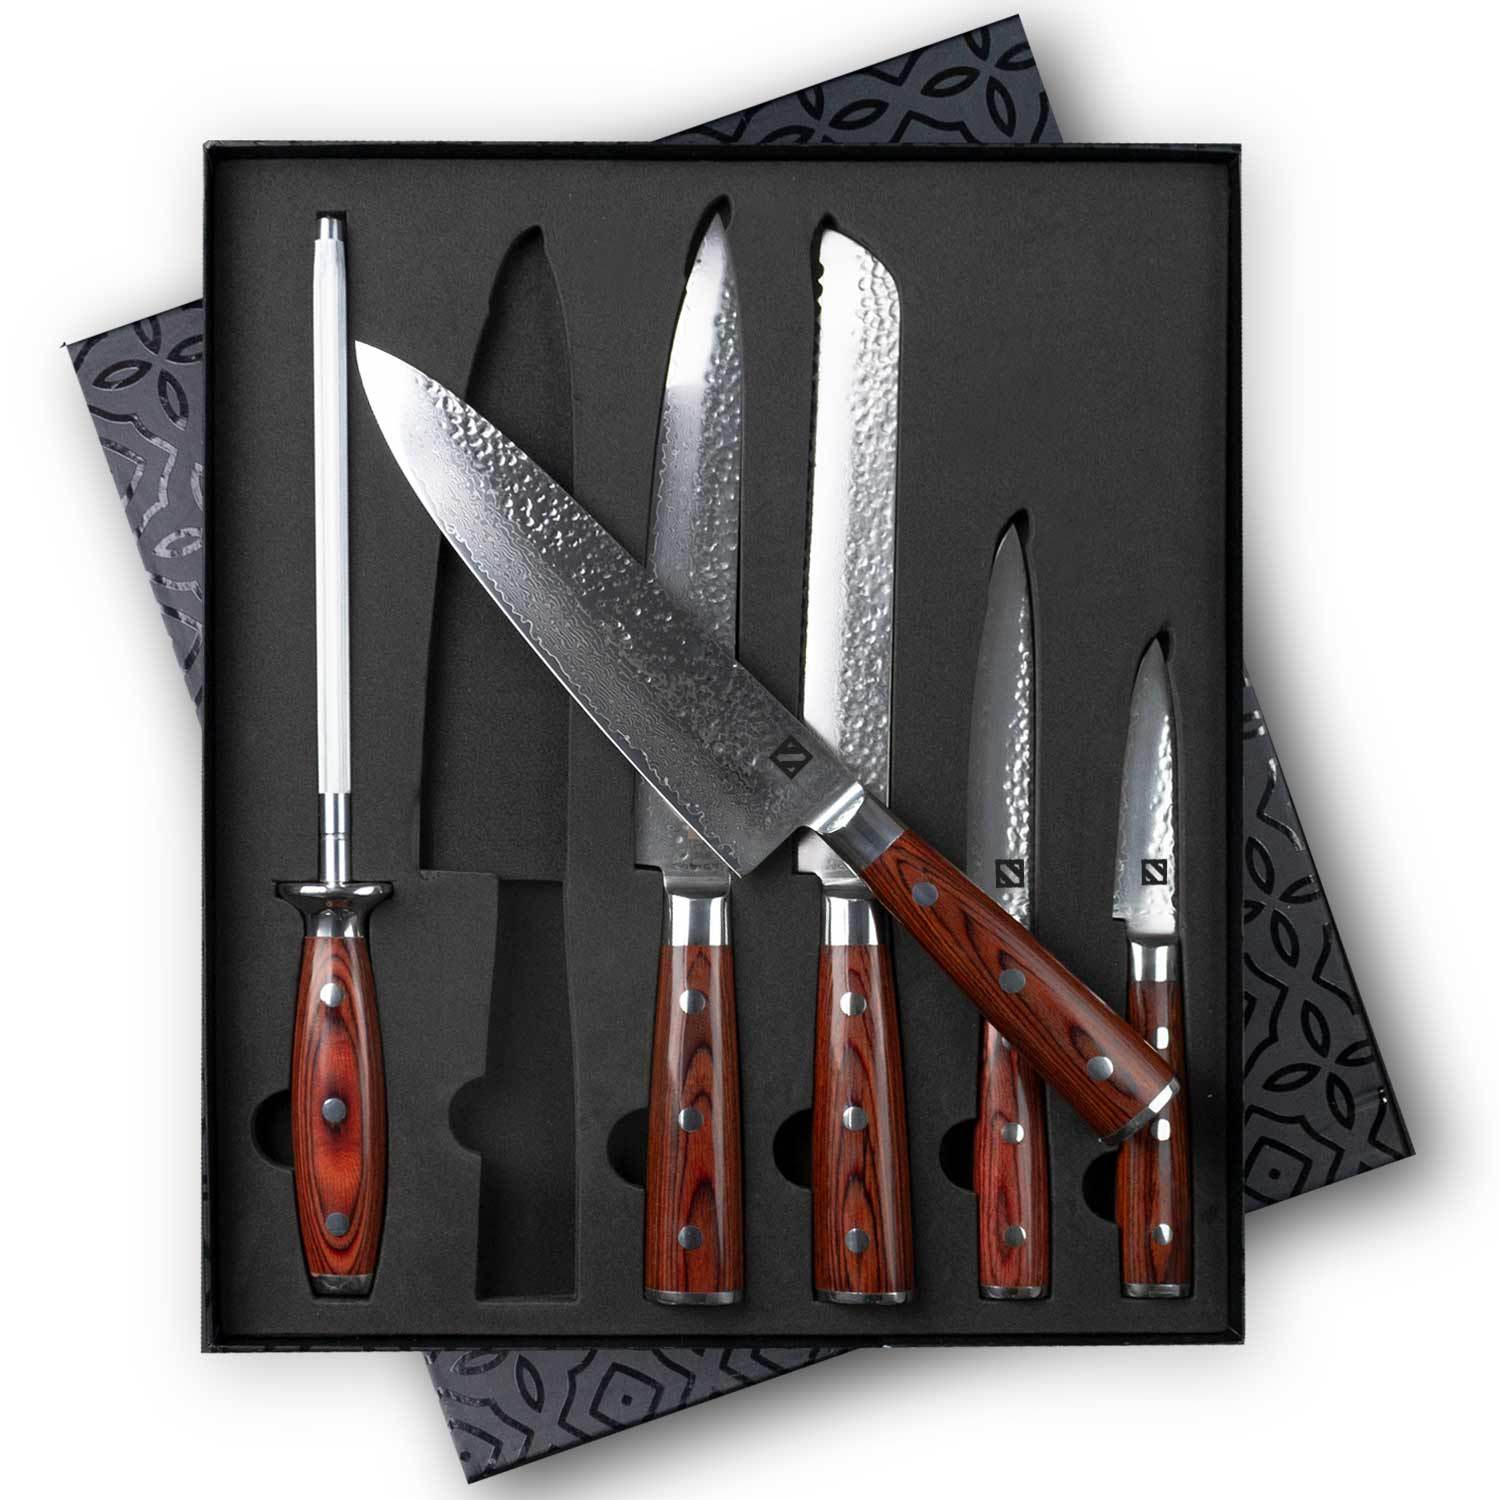 6 Piece Hammered Damascus Steel Knife Set with 16-Layer Steel